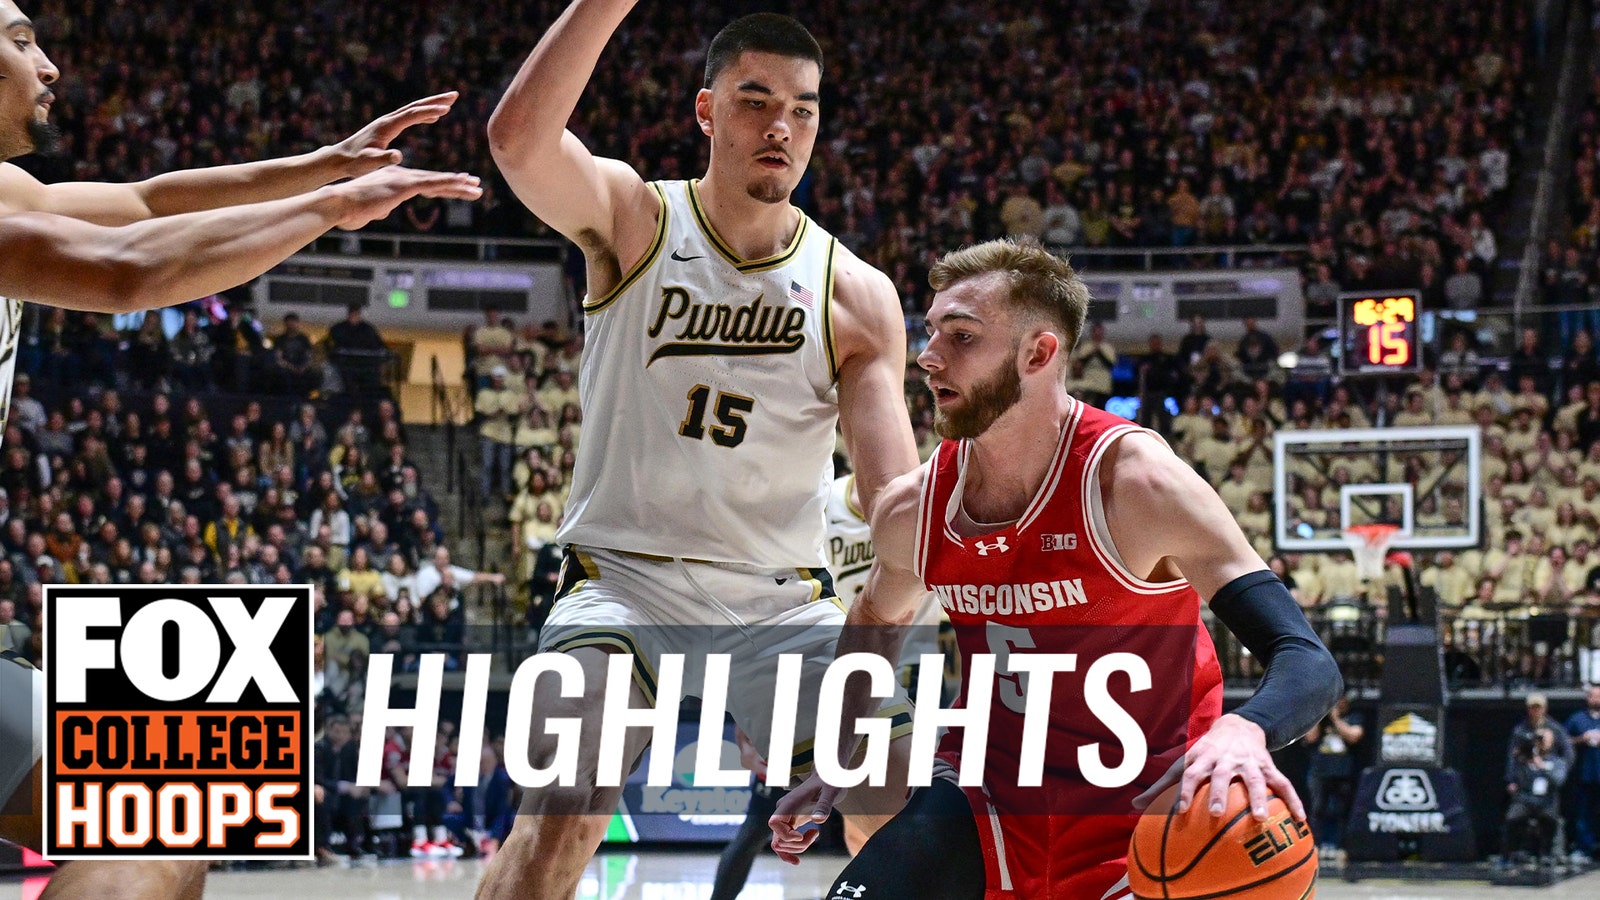 Zach Edey leads Purdue to a 78-70 win over Wisconsin on Senior Day